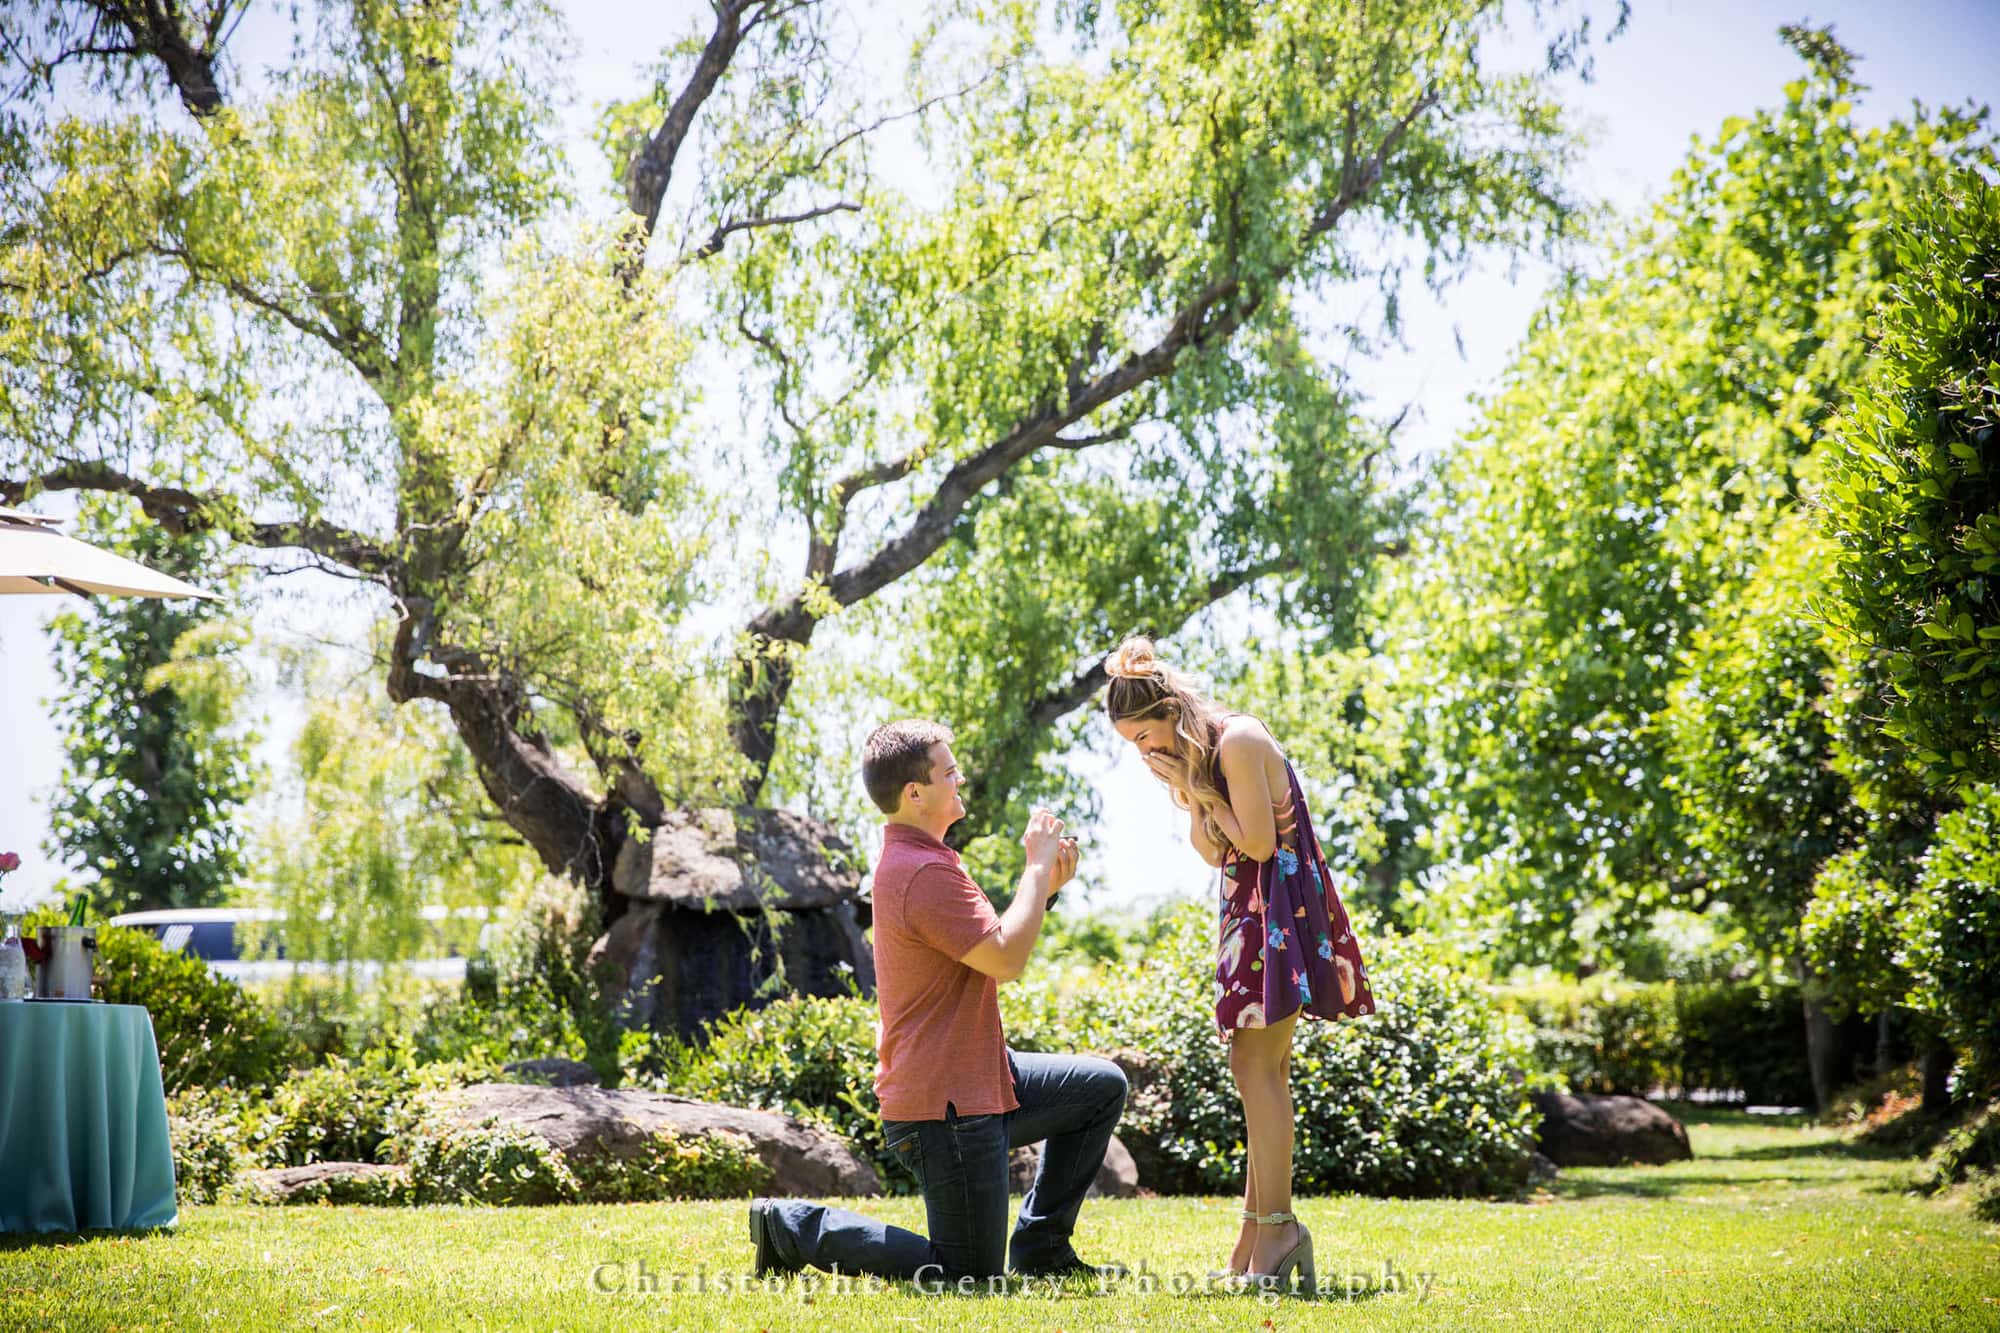 Marriage Proposal Photography at Peju Province Winery in Rutherford, California